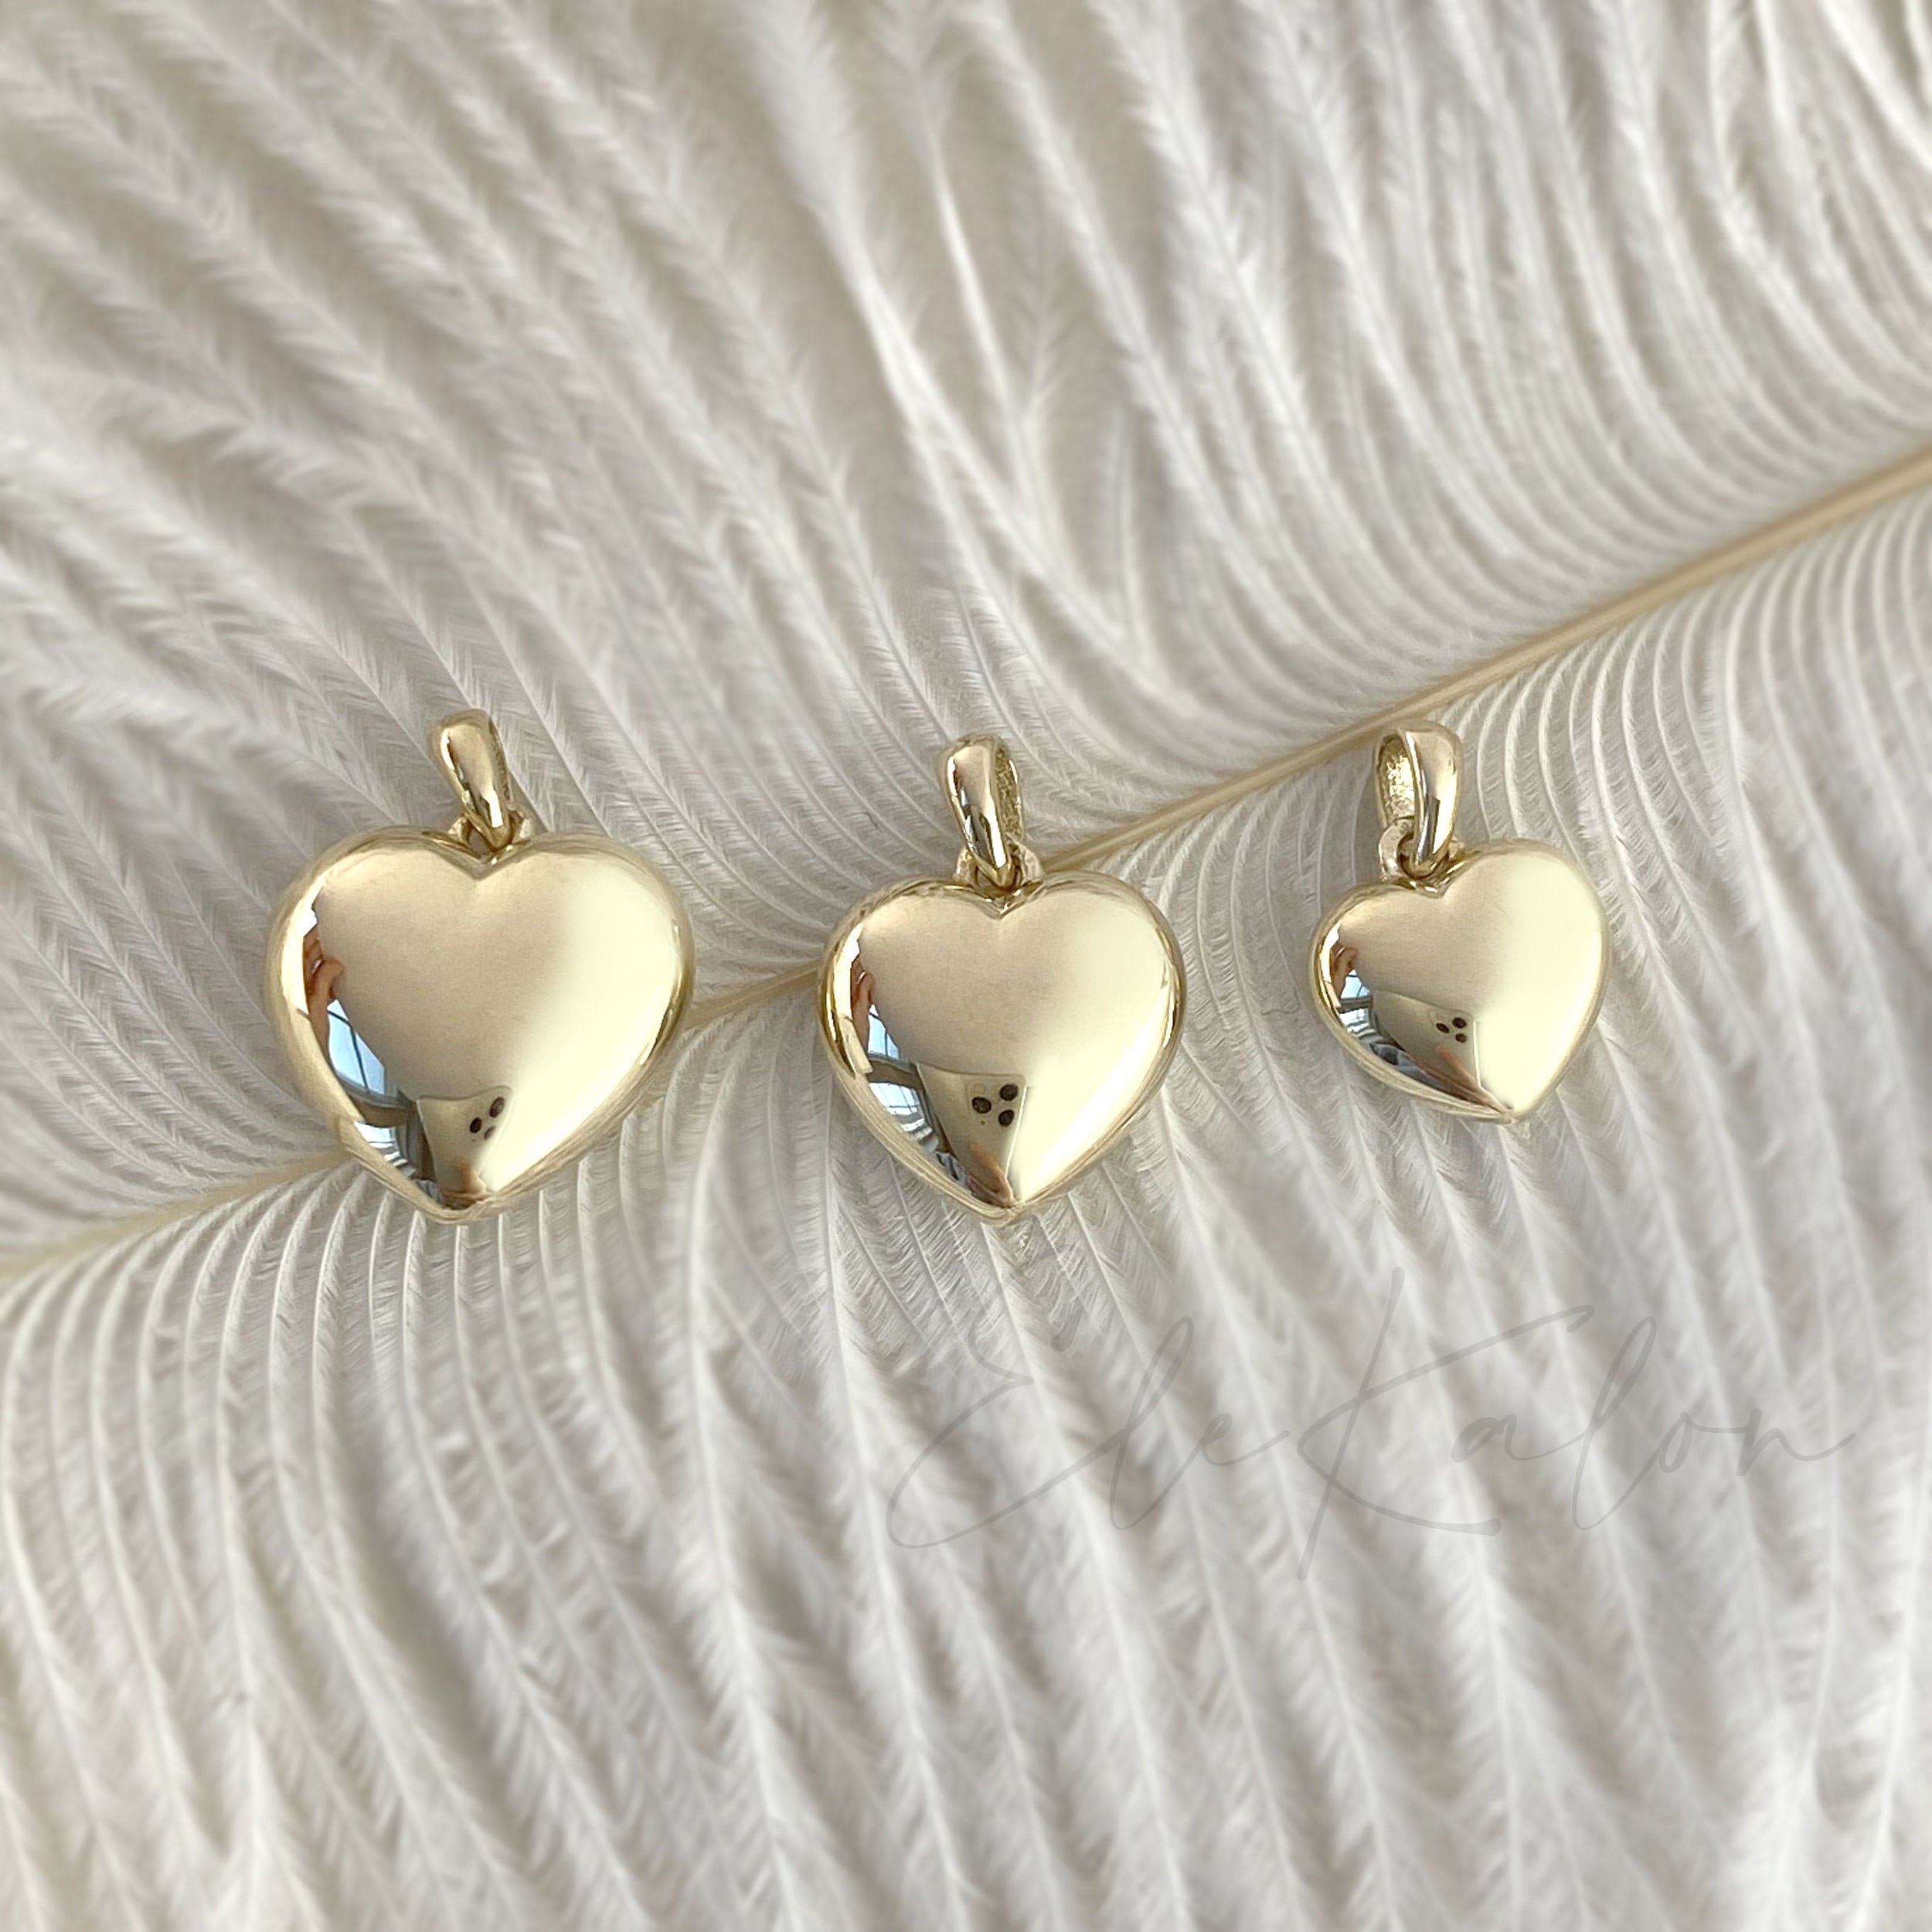 Gold Filled Puffy Heart Necklace — Boy Cherie Jewelry: Delicate Fashion  Jewelry That Won't Break or Tarnish